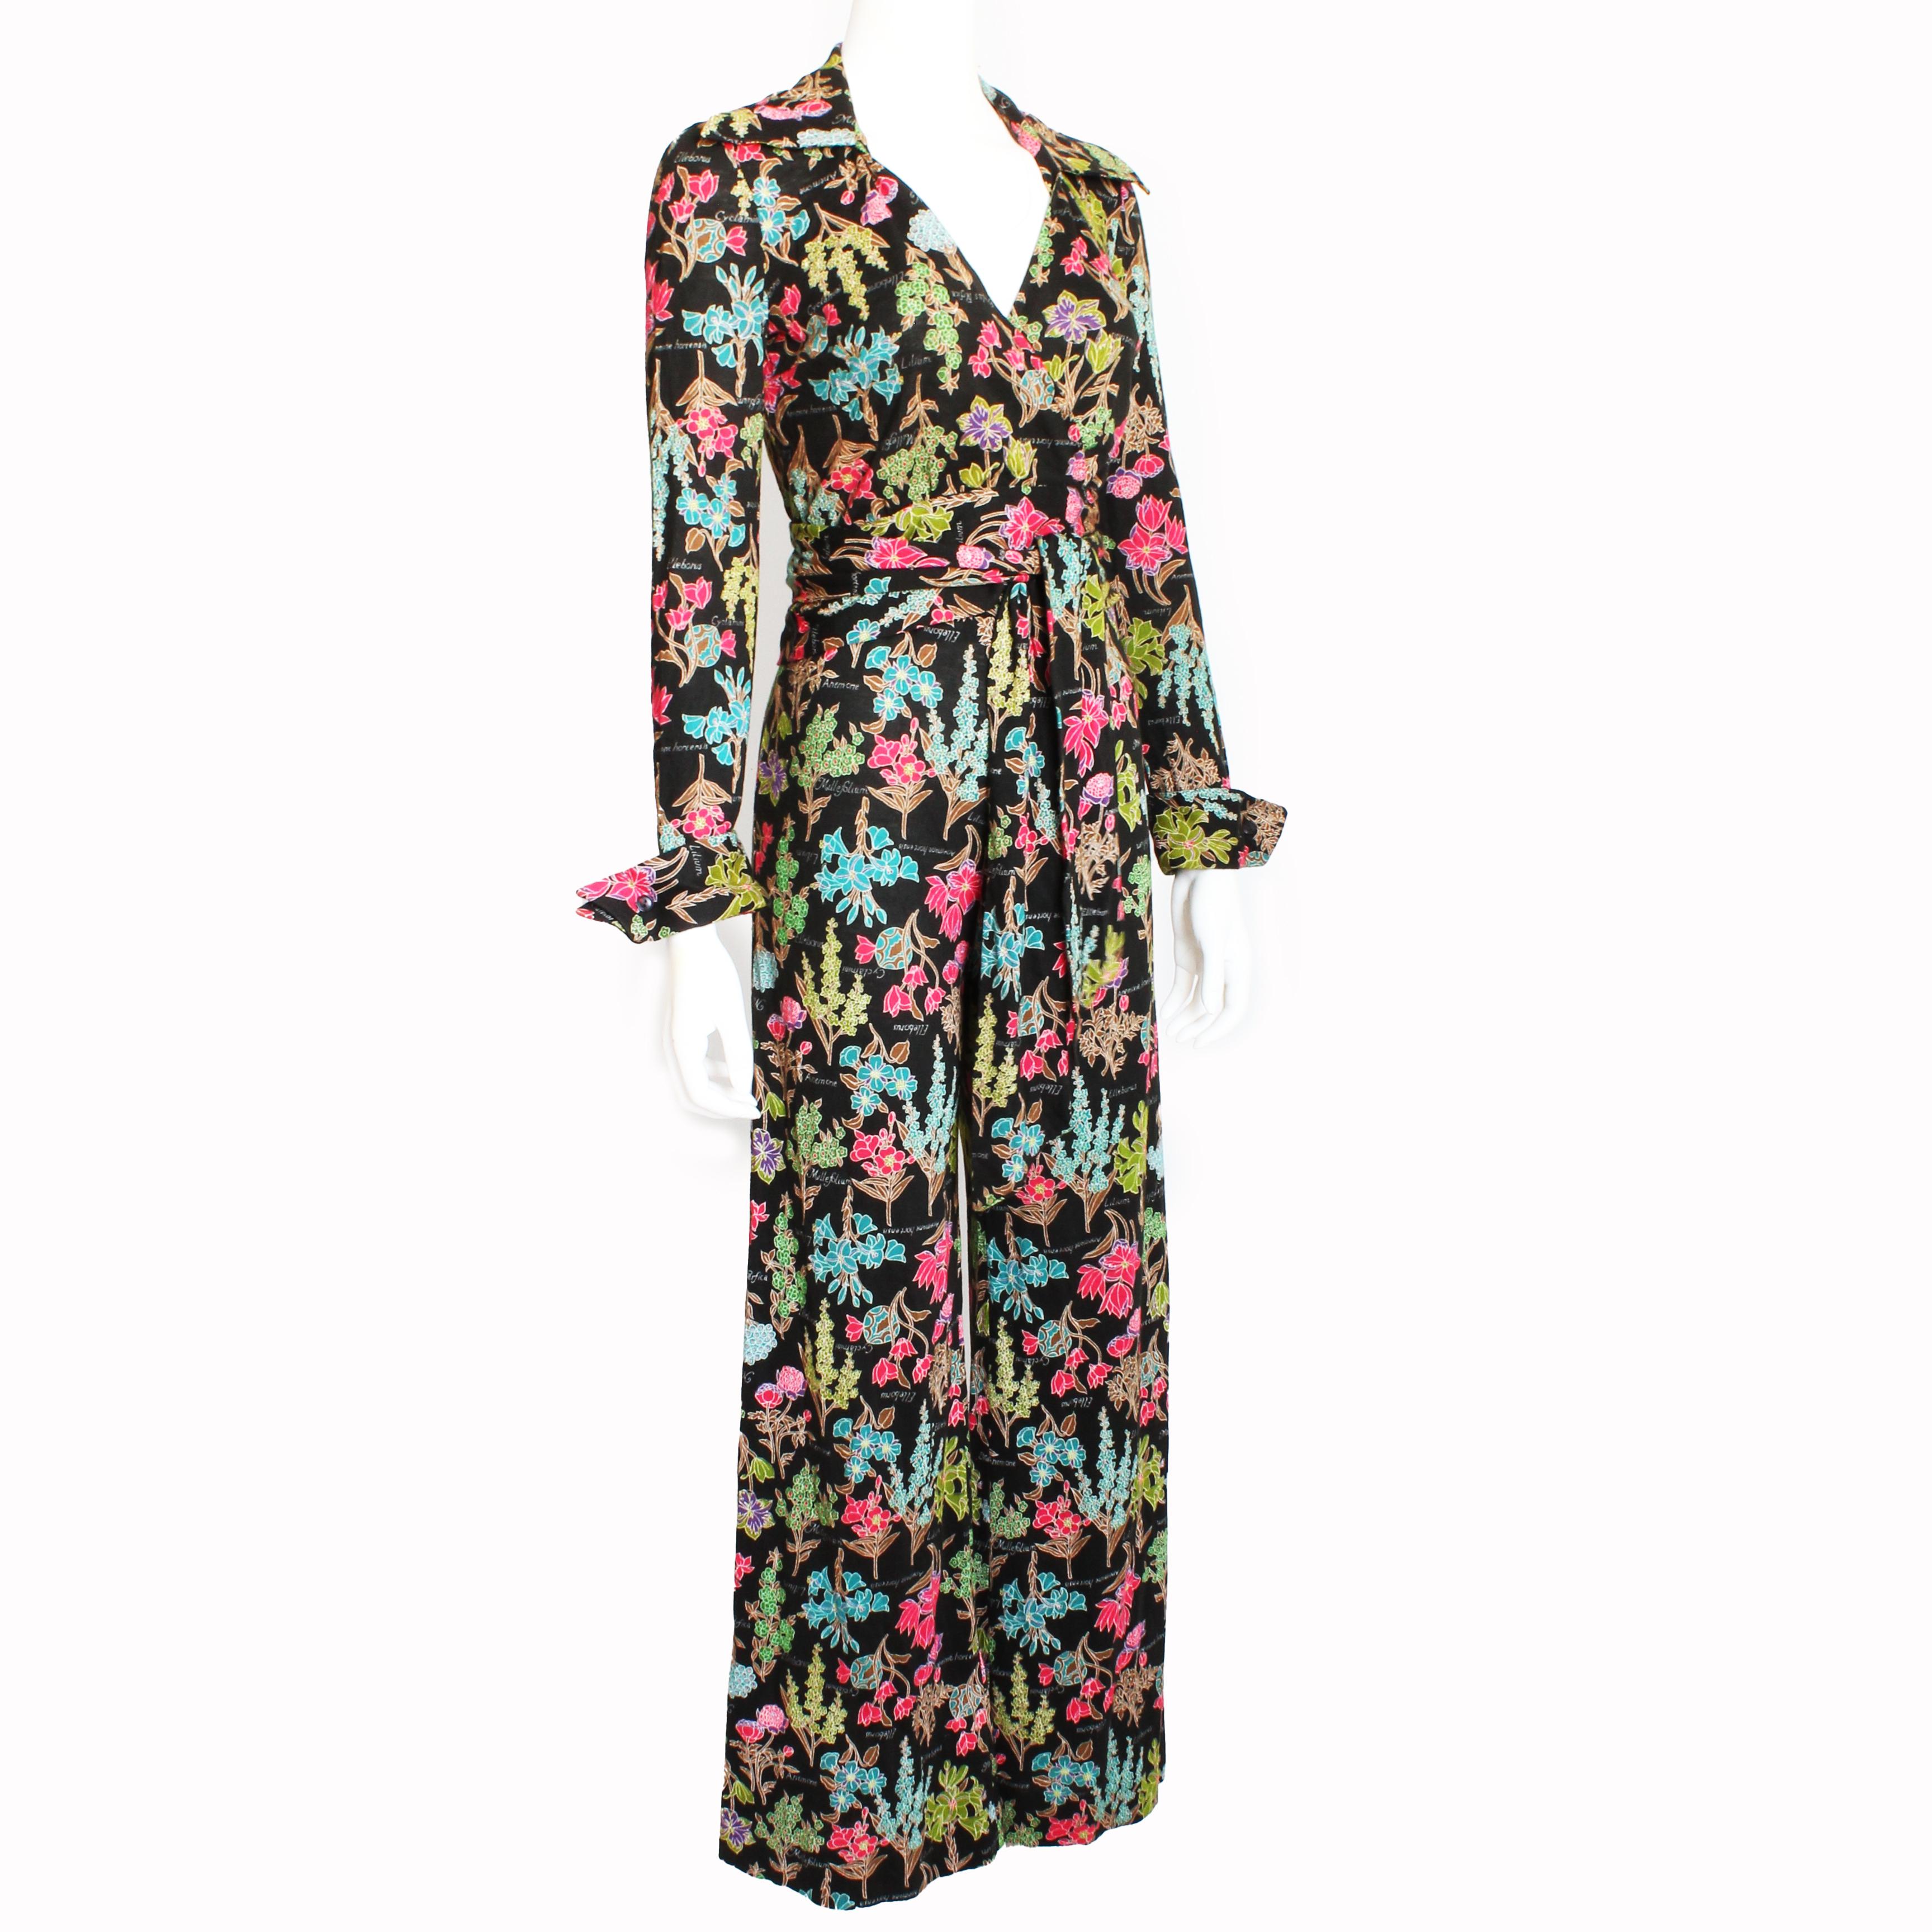 This ensemble was designed by Diane Von Furstenberg in the mid-1970s and includes her signature wrap style as a blouse with matching flared bottom pants.  Made from an acrylic jersey fabric, it features a colorful floral pattern against a black